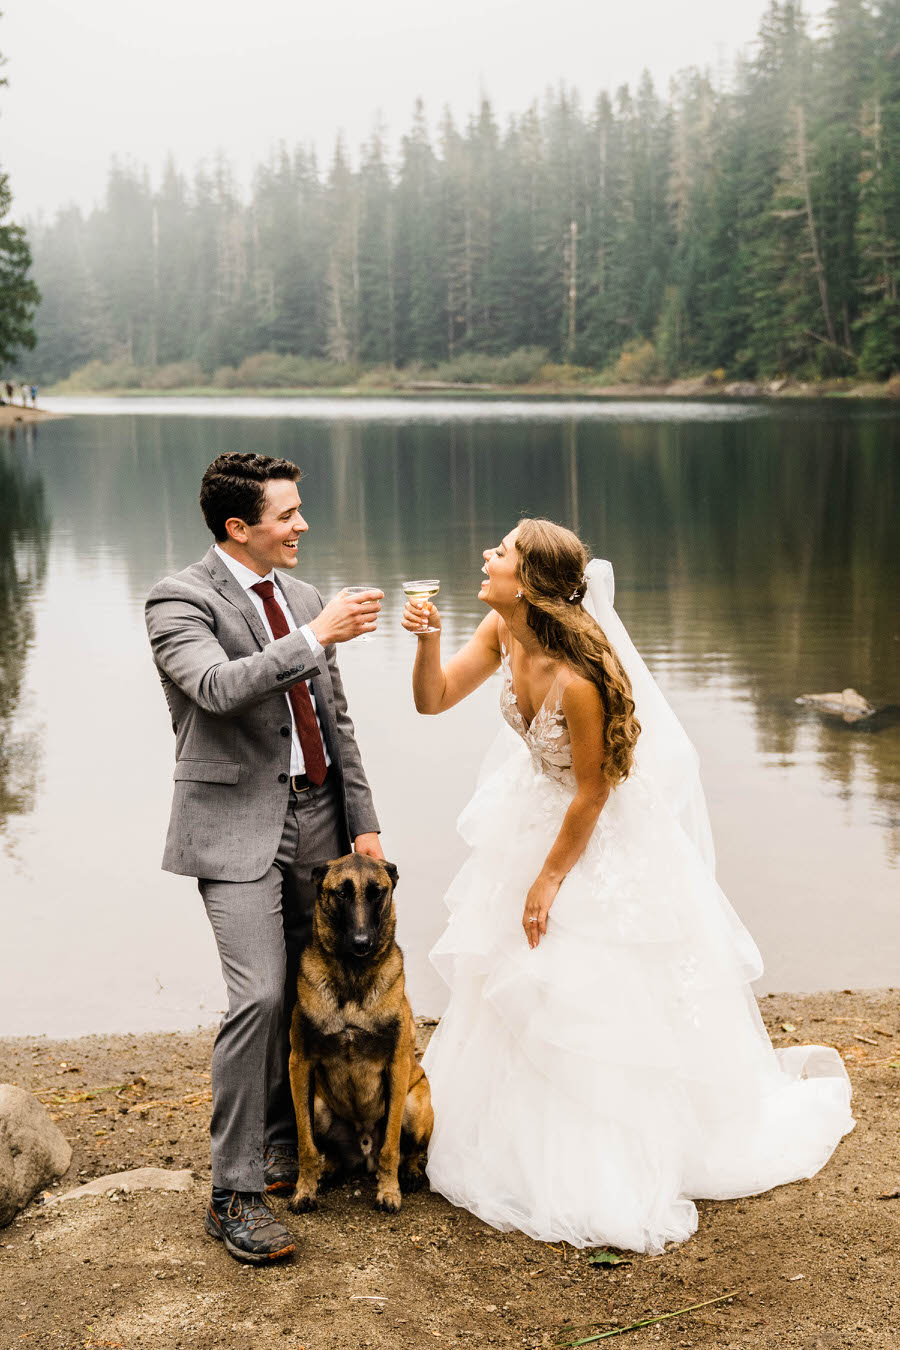 A bride and groom toast champagne as their dog stands with them after their hiking elopement in Washington